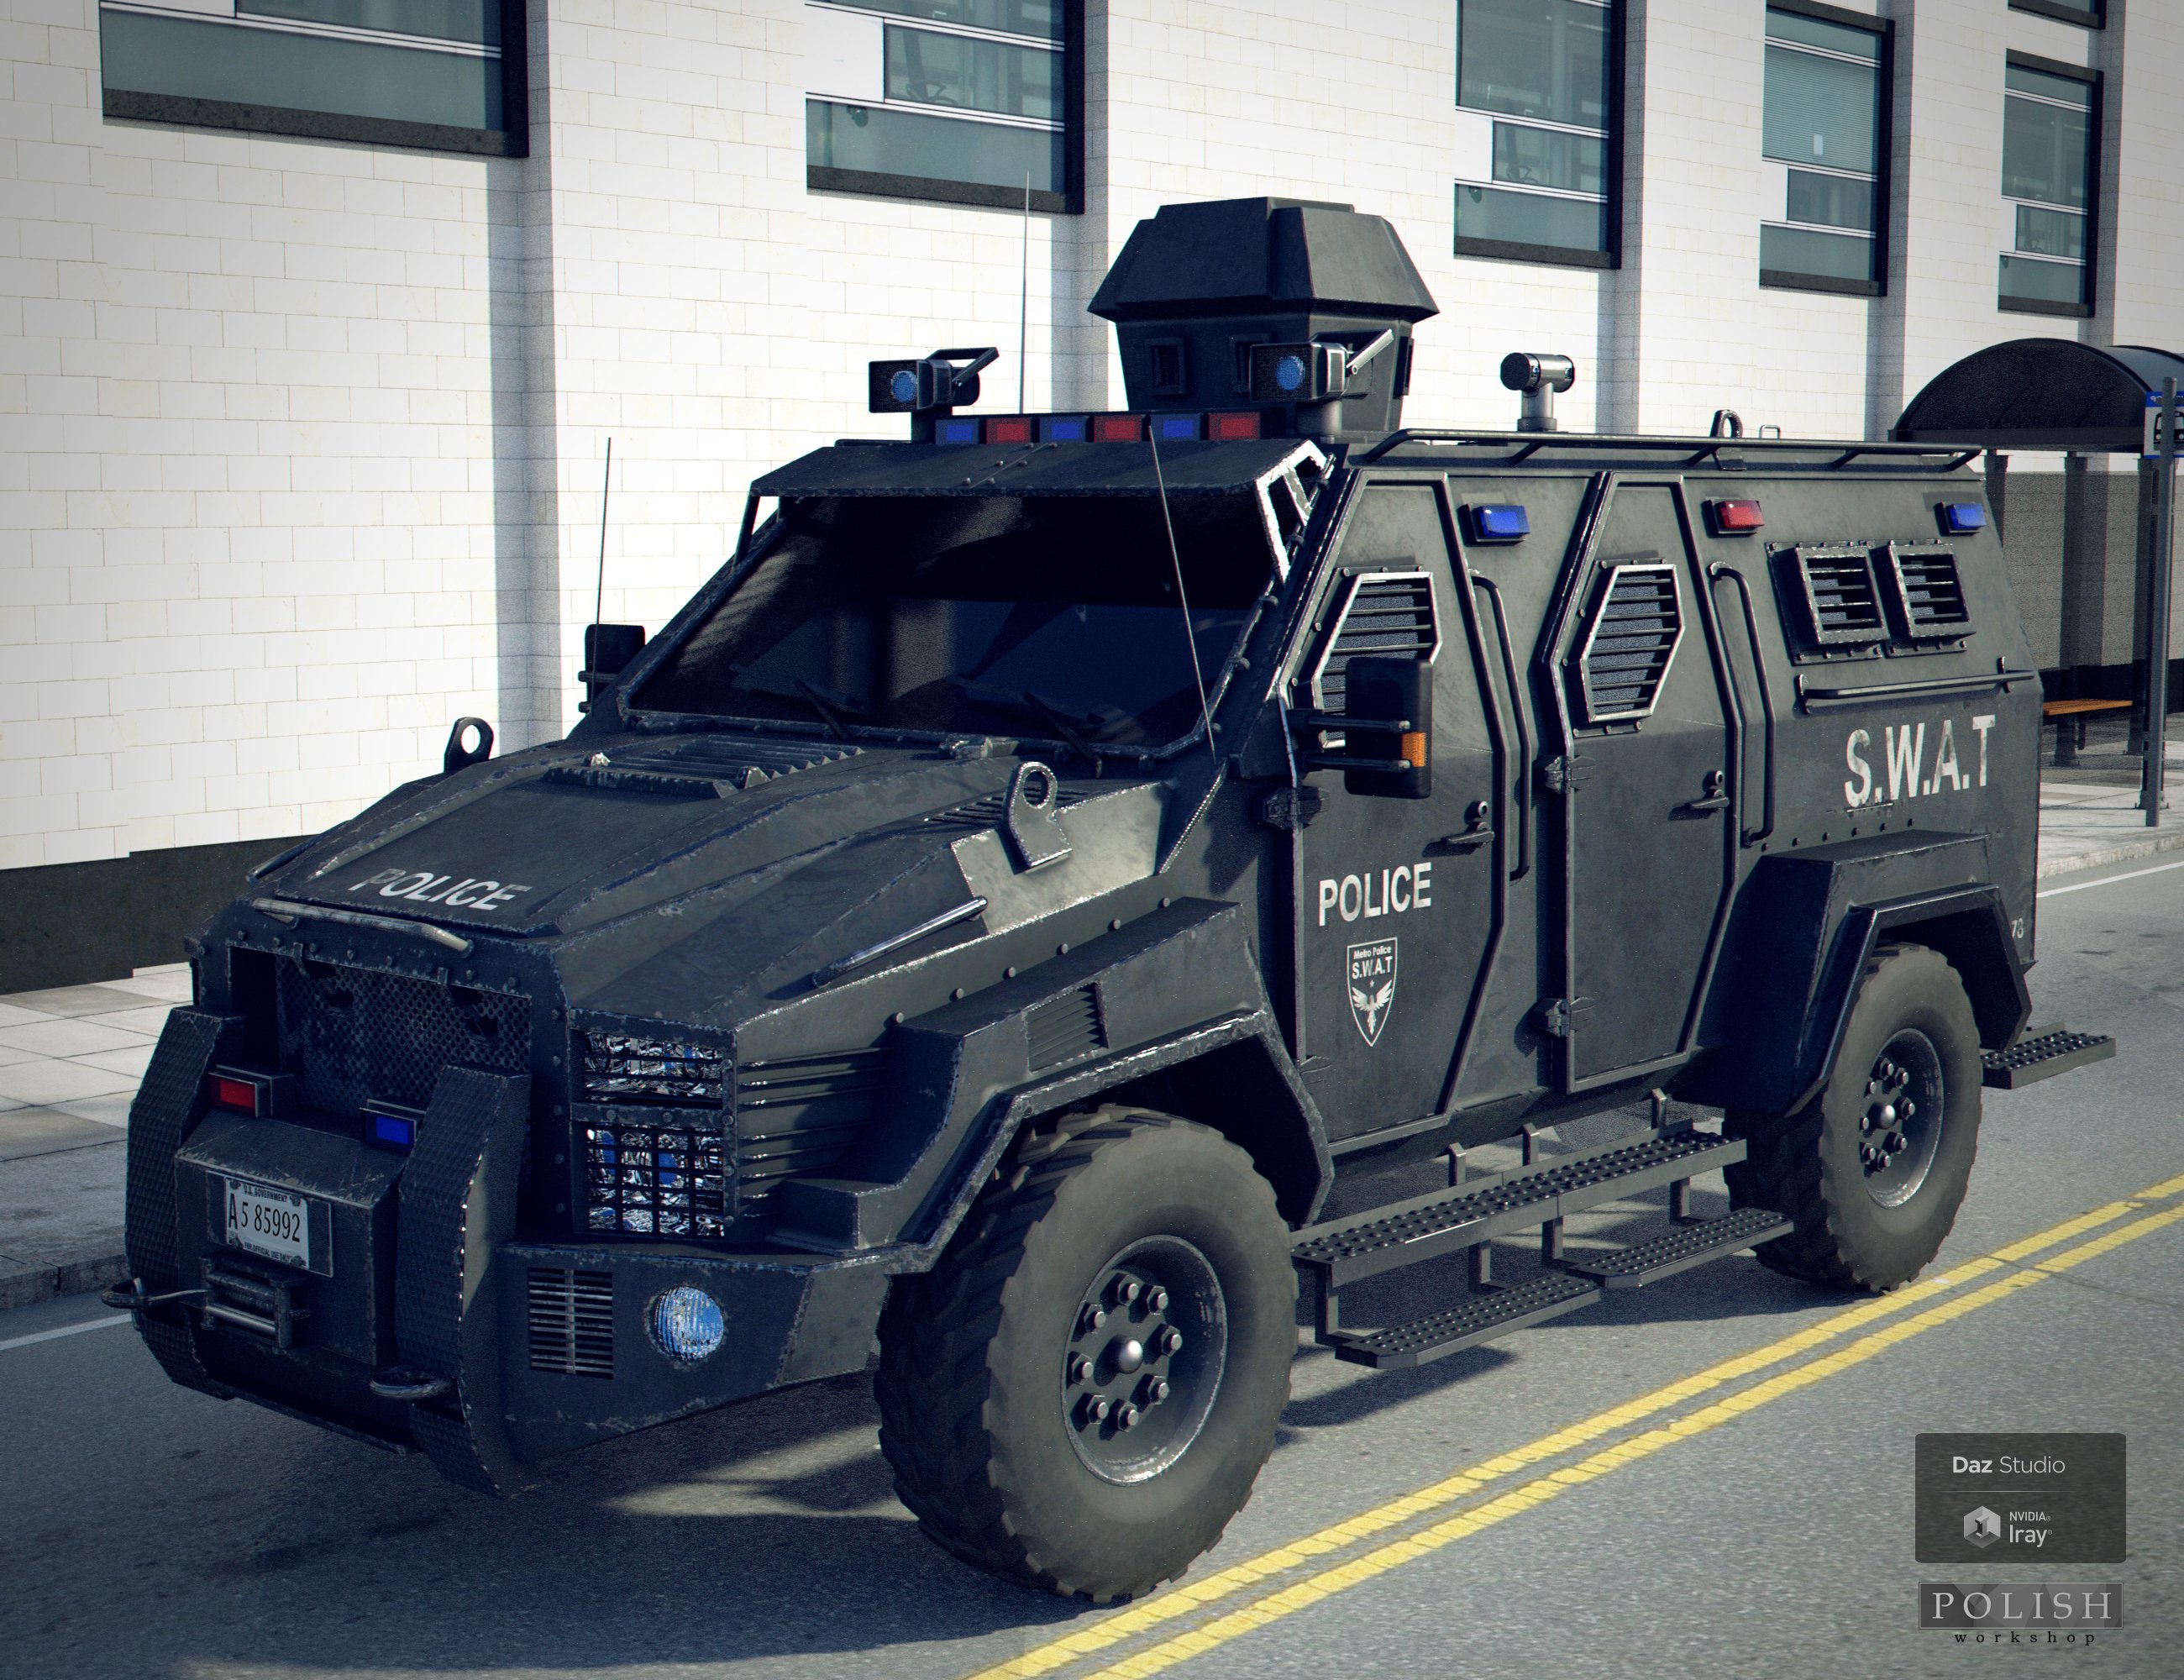 SWAT Armored Vehicle by: Polish, 3D Models by Daz 3D